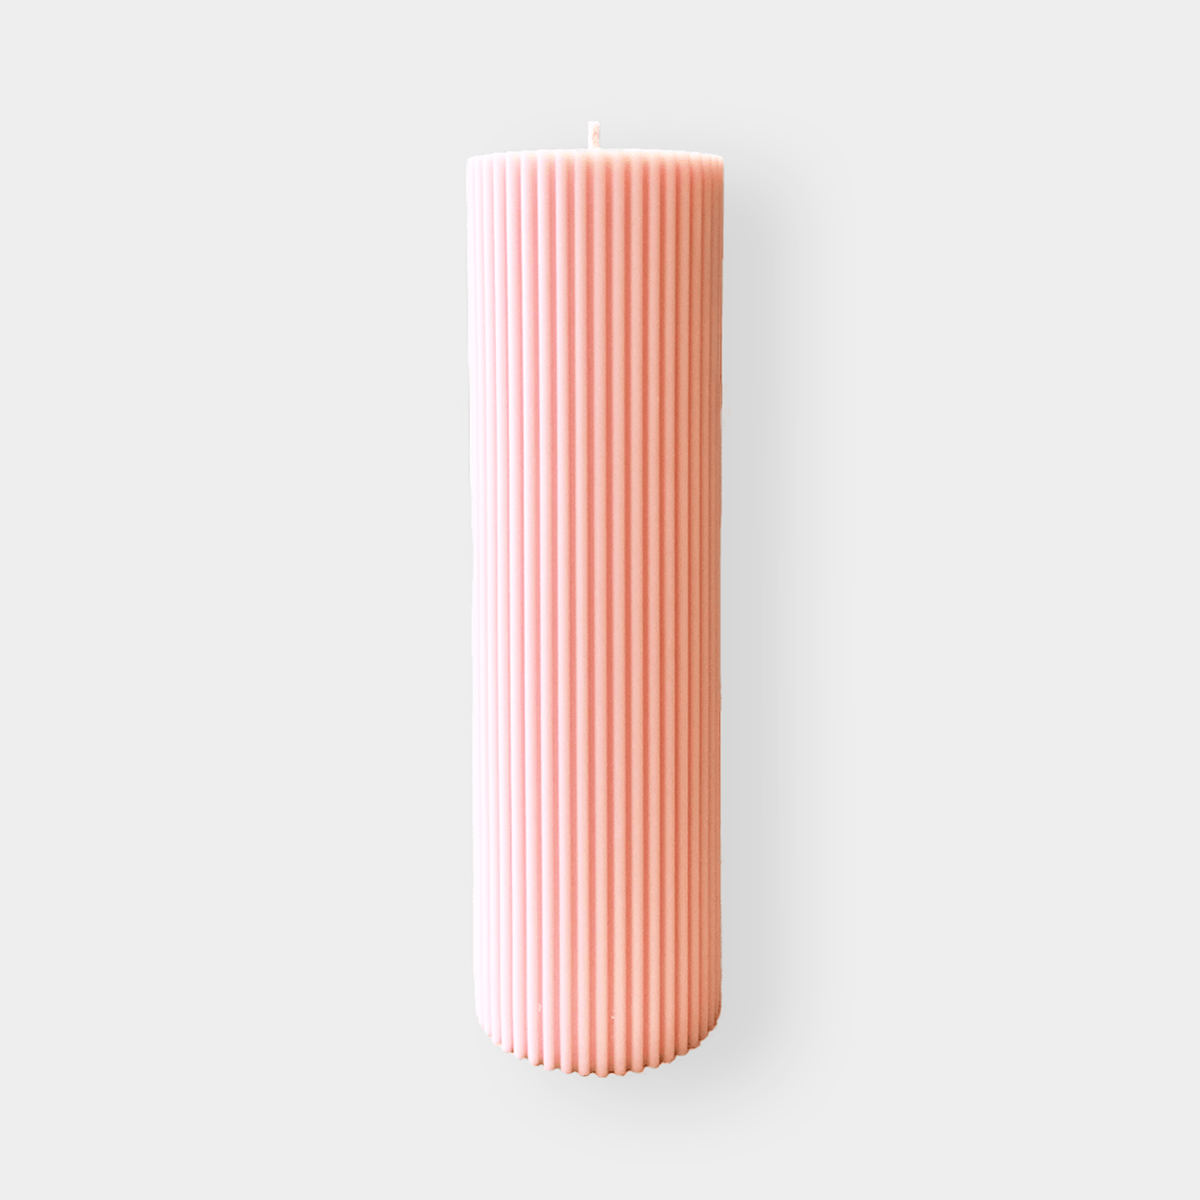 Makes Scents Of It Candles Make Scents of It 20cm Pillar Candle - Blush (7817539846393)